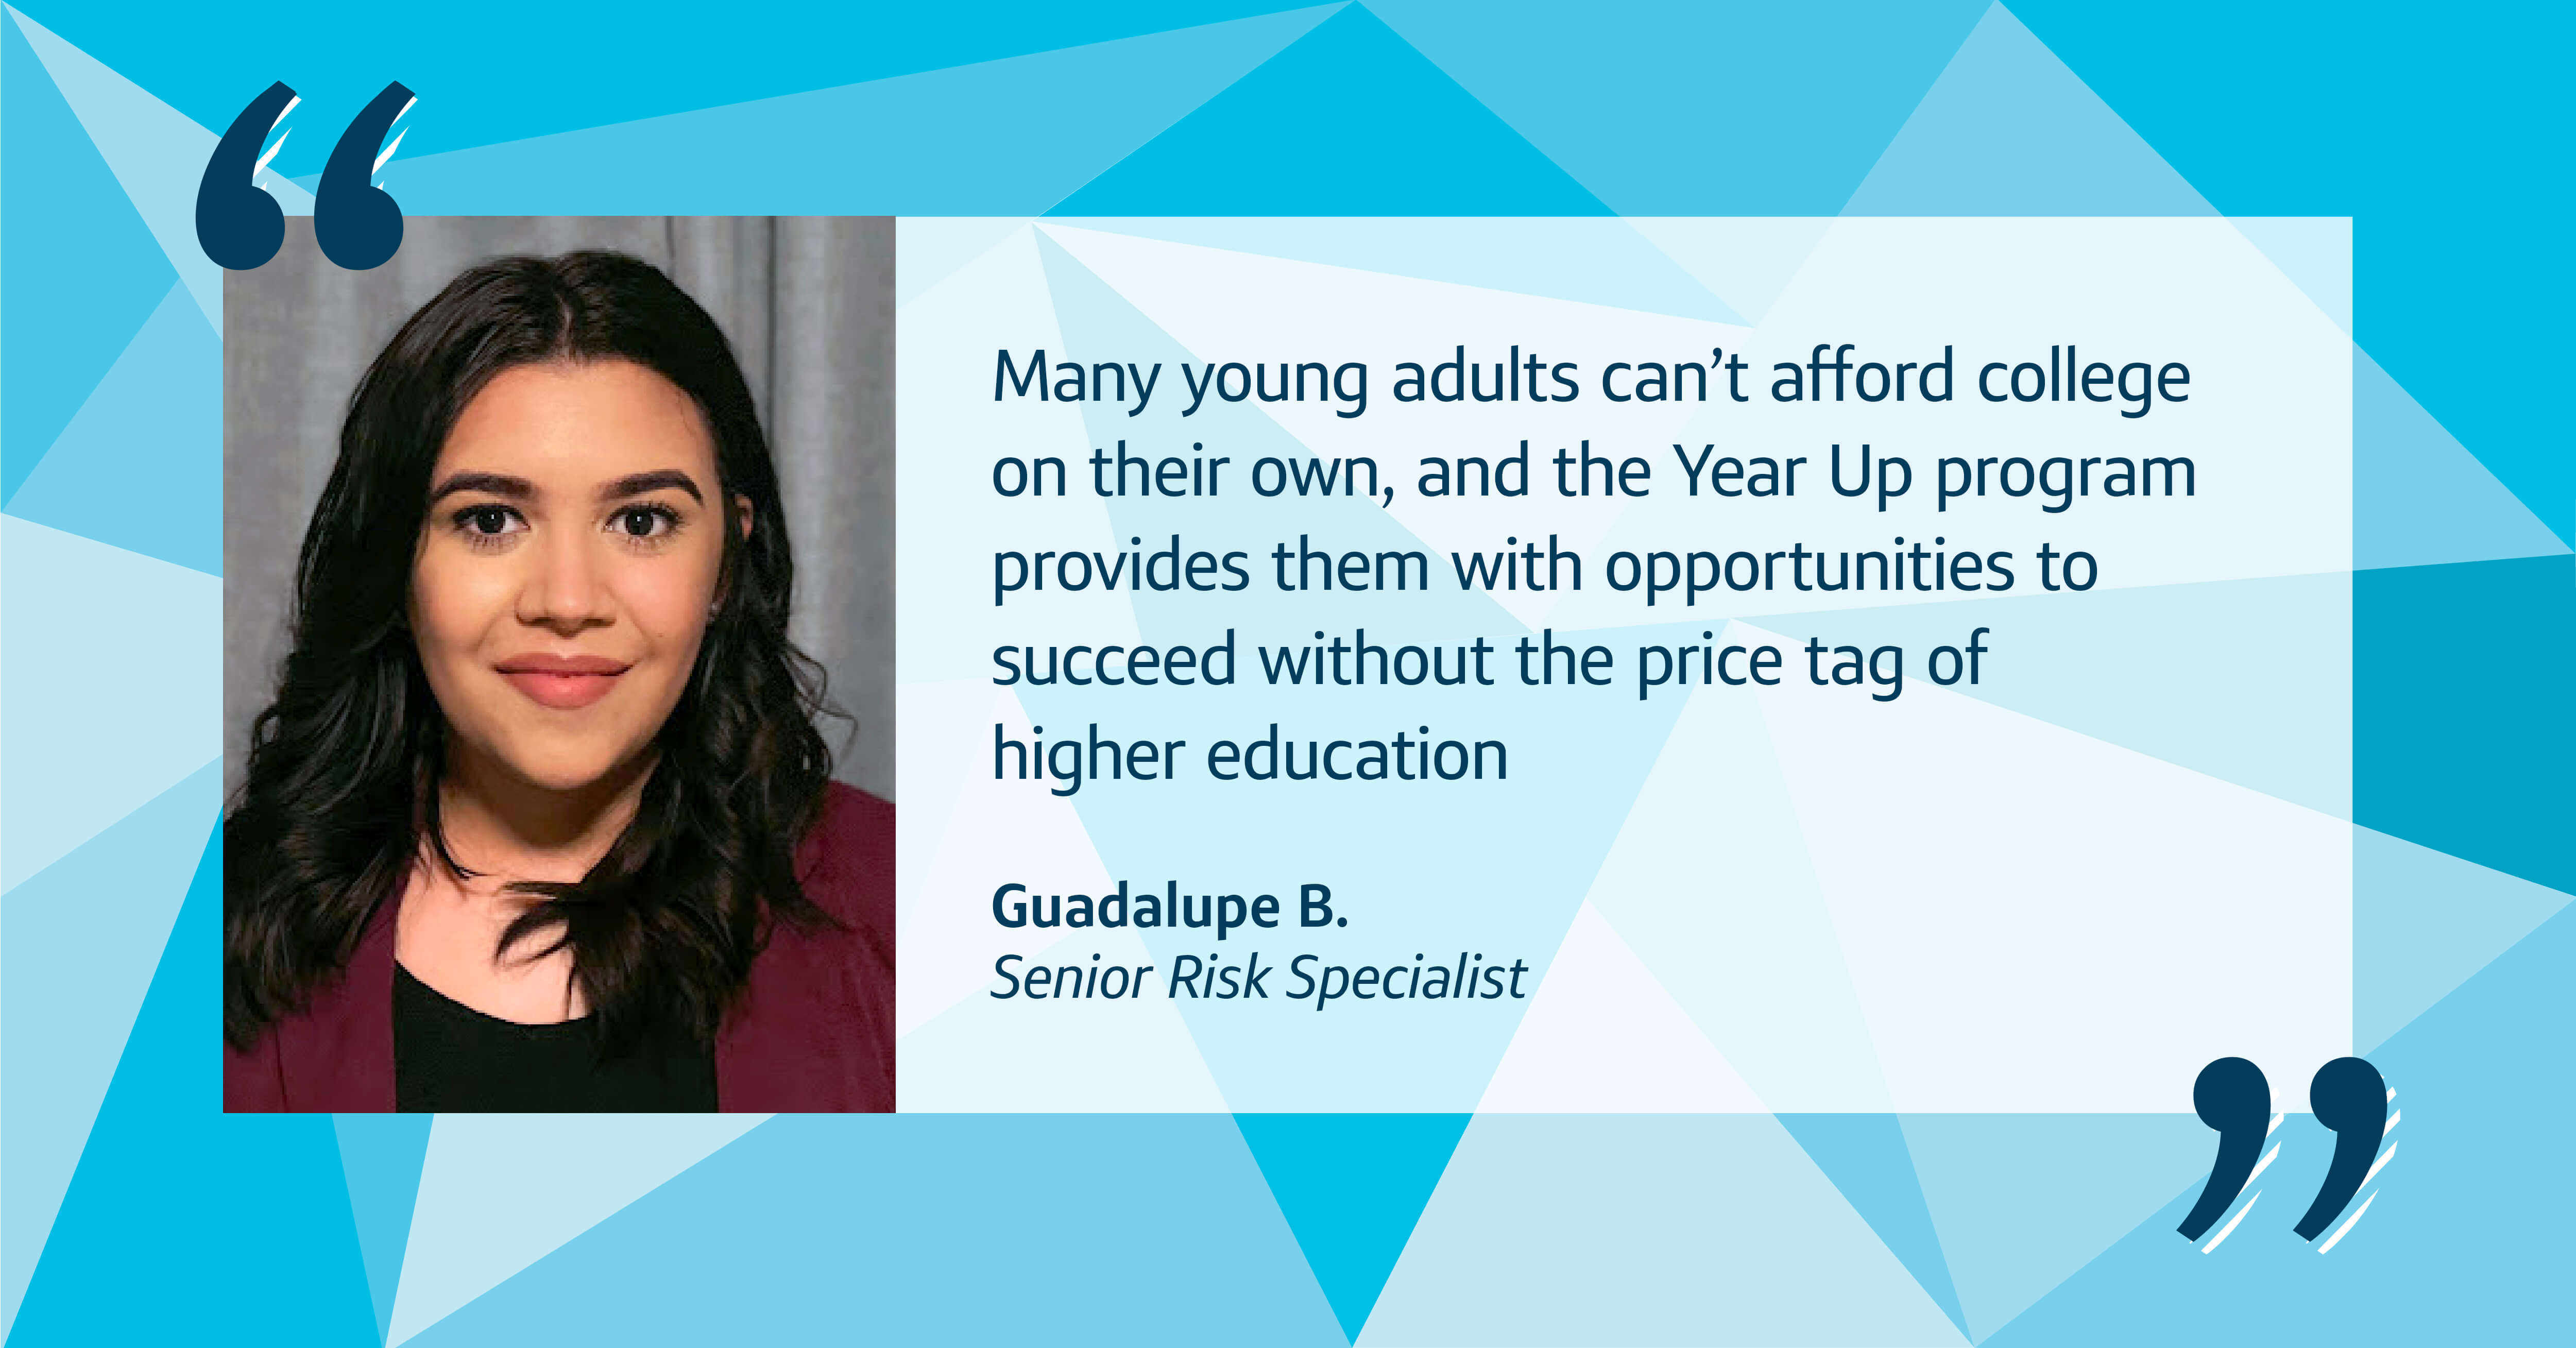 Capital One quote image with a picture of Guadalupe, Capital One Senior Risk Specialist, that says, “Many young adults can’t afford college on their own, and the Year Up program provides them with opportunities to succeed without the price tag of higher education,” shares Lupe